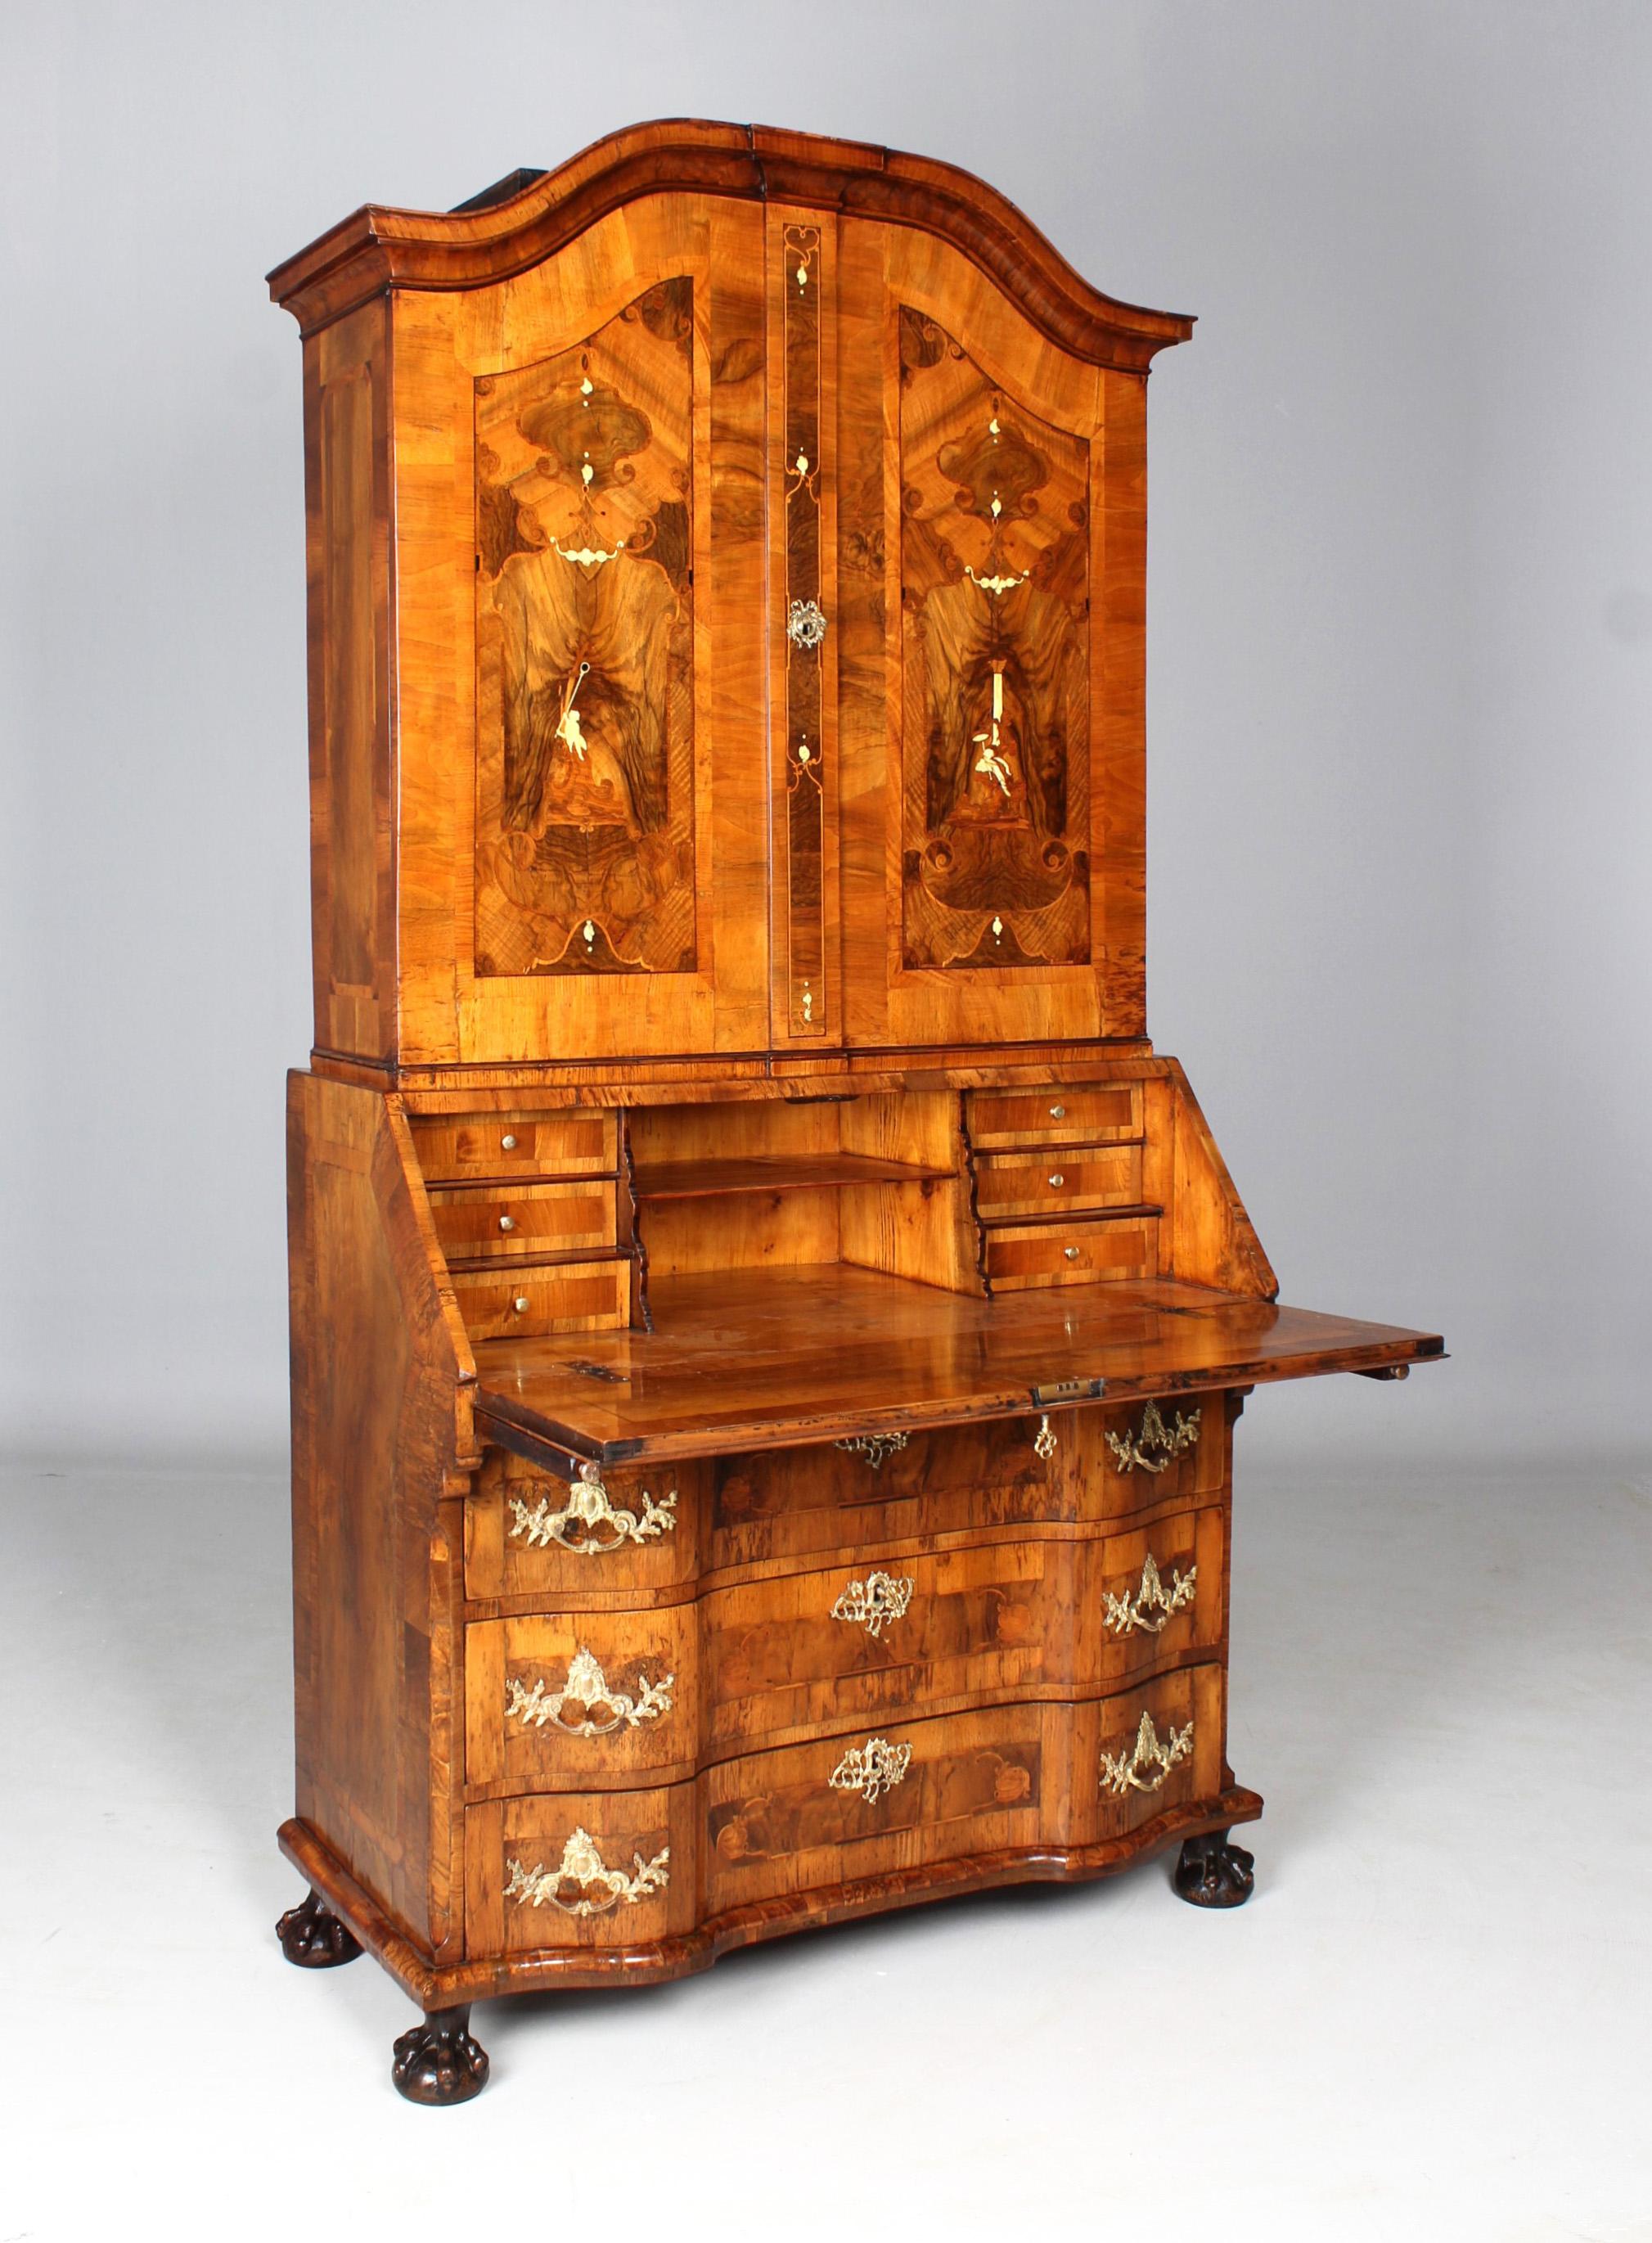 Baroque top secretary with Fine marquetry

Brunswick
walnut etc.
Baroque around 1750

Dimensions: H x W x D: 215 x 119 x 56 cm

Description:
Beautiful slender writing cabinet from the Lower Saxon Baroque period circa 1750-60.

Two-part